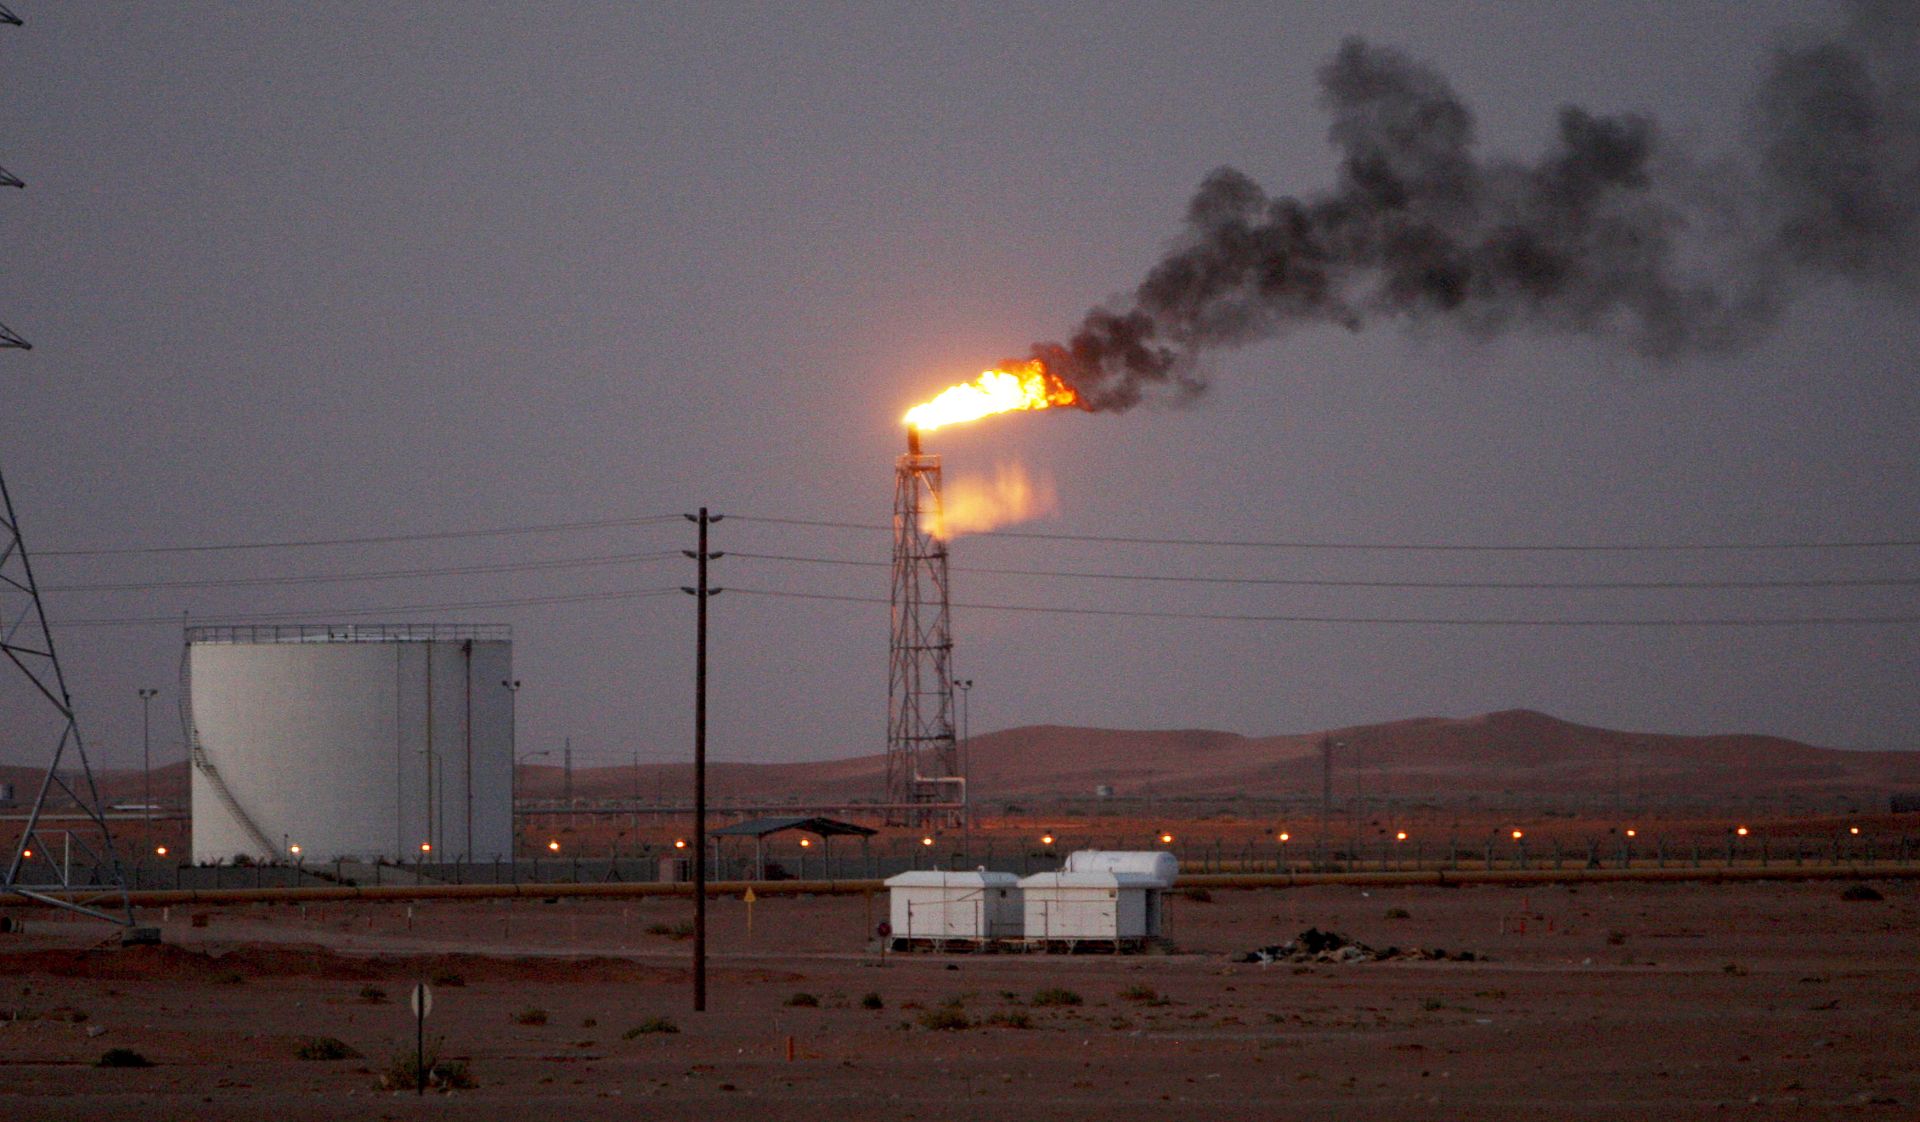 epa07841156 (FILE) - A gas flame behind pipelines in the desert at Khurais oil field, about 160 km from Riyadh, Kingdom of Saudi Arabia, 23 June 2008 (reissued 14 September 2019). According to Saudi state-owned oil company Aramco, two of its oil facilities in Saudi Arabia, Khurais and Abqaiq, were set on fire after allegedly having been targeted by drone attacks.  EPA/ALI HAIDER *** Local Caption *** 55191226